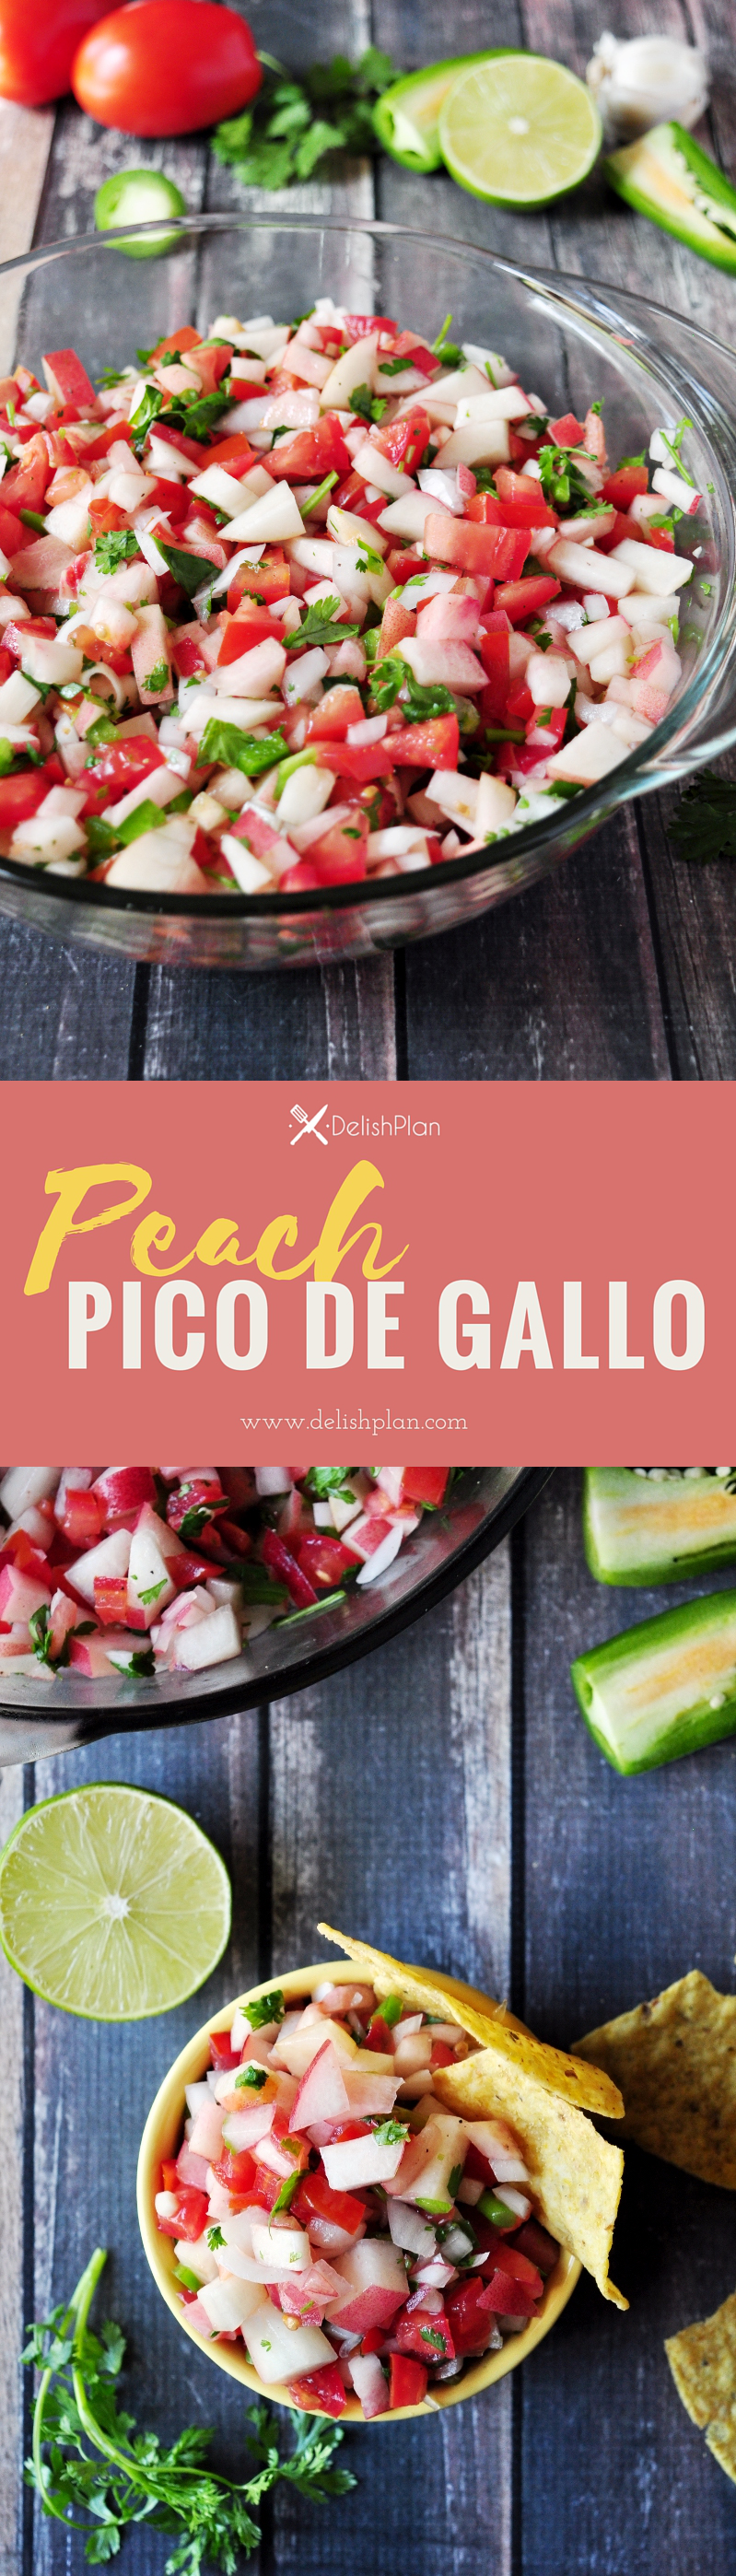 When classic pico de gallo meets fresh peach, the whole thing turns into a refreshing summer appetizer that you won't get enough of!